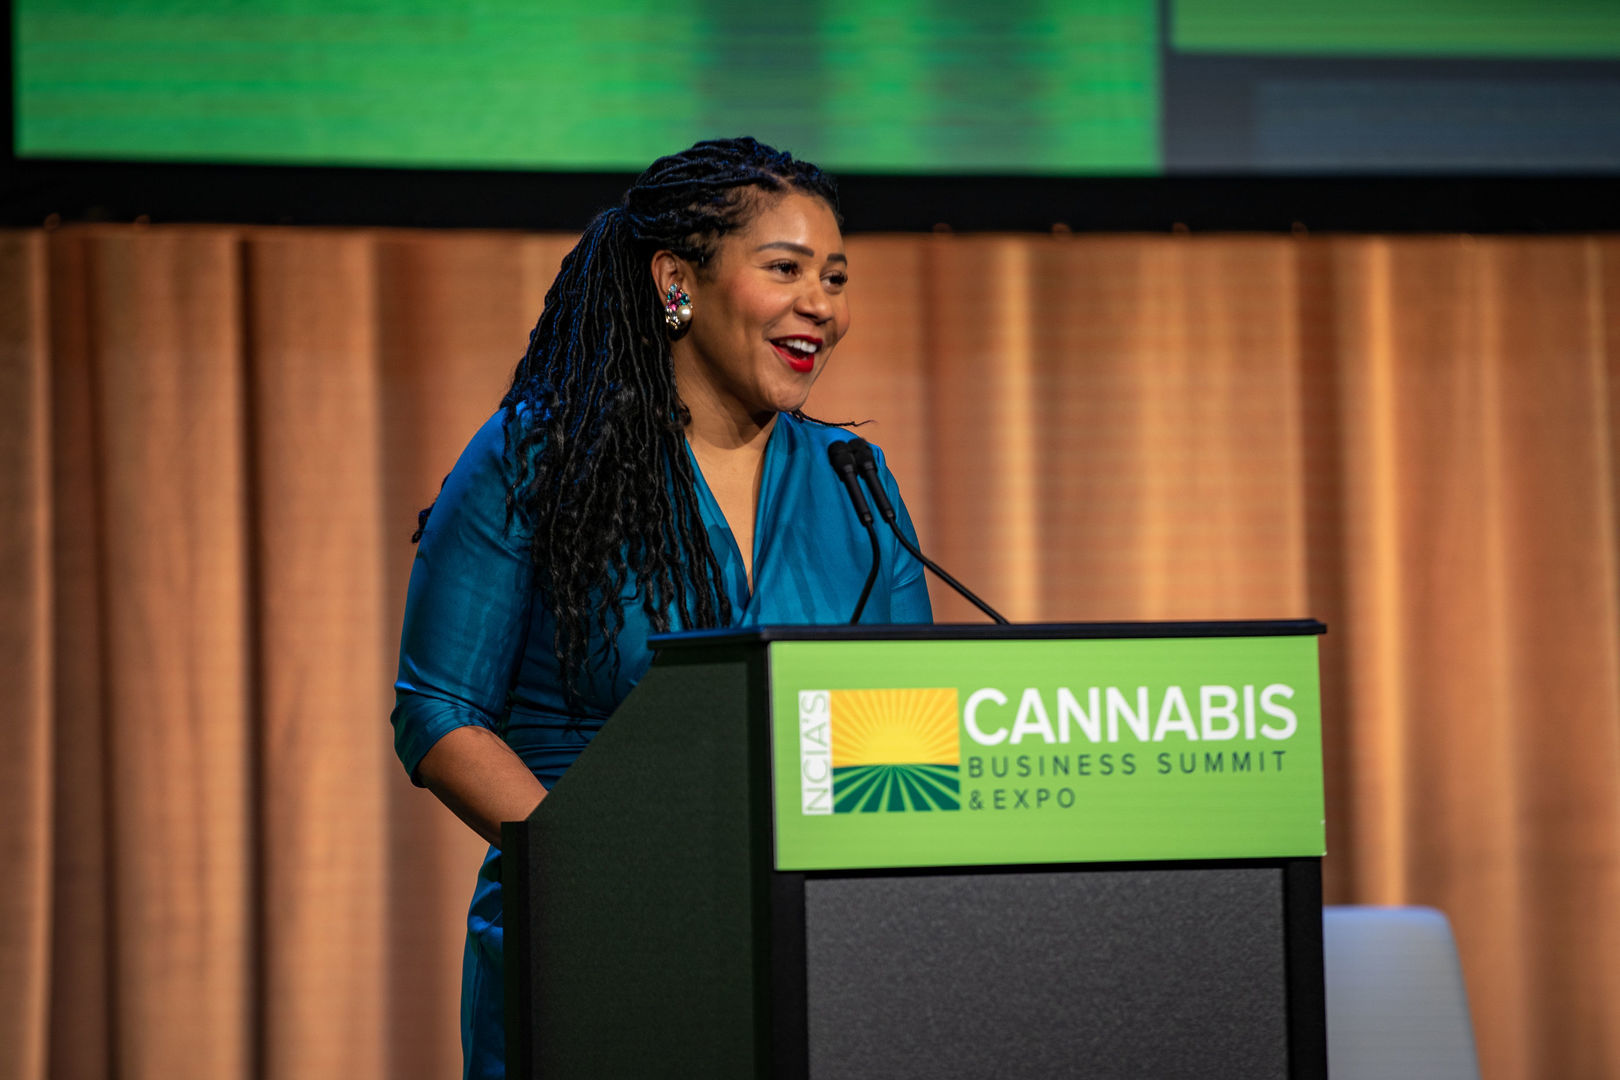 NCIA's 8th Annual Cannabis Business Summit and Expo